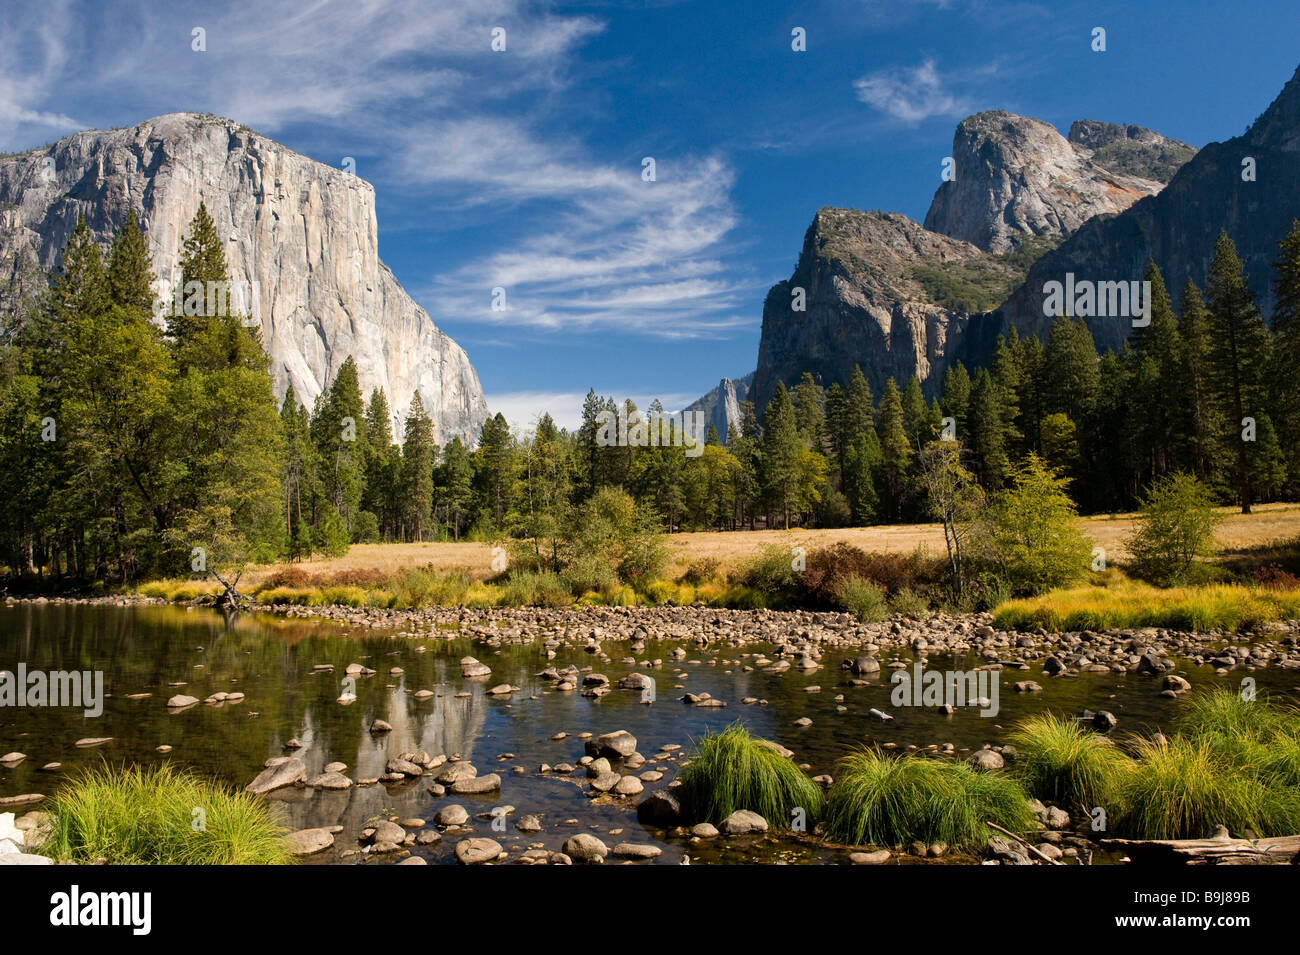 Merced River and Yosemite Valley seen from Gates of the Valley, Yosemite National Park, California, USA Stock Photo